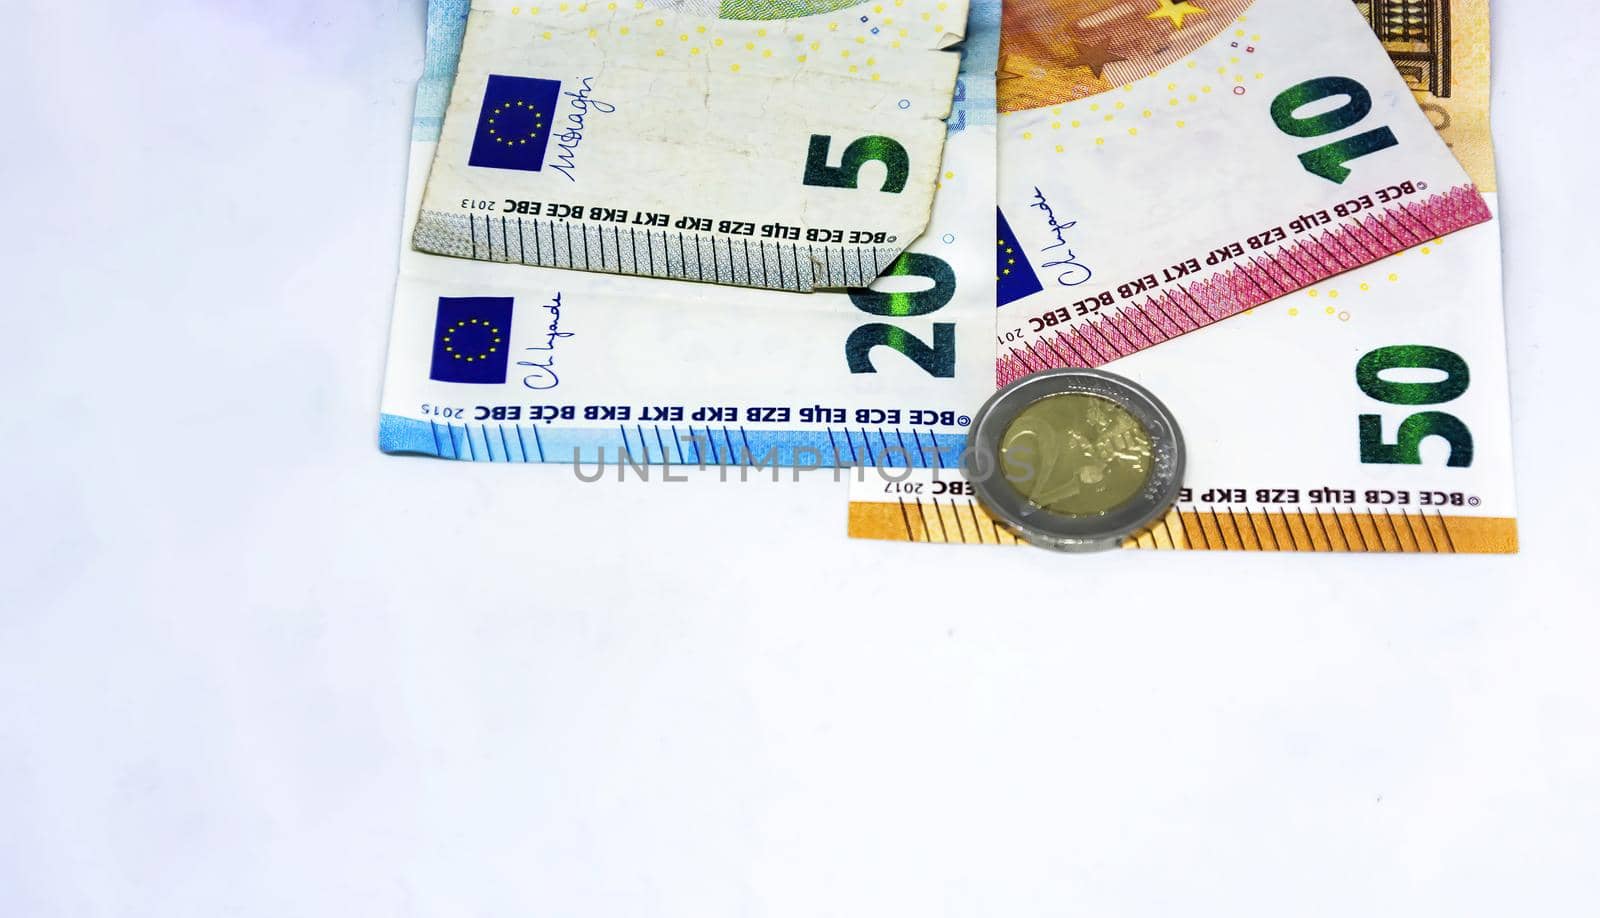 European Union coins and banknotes of different values by rarrarorro